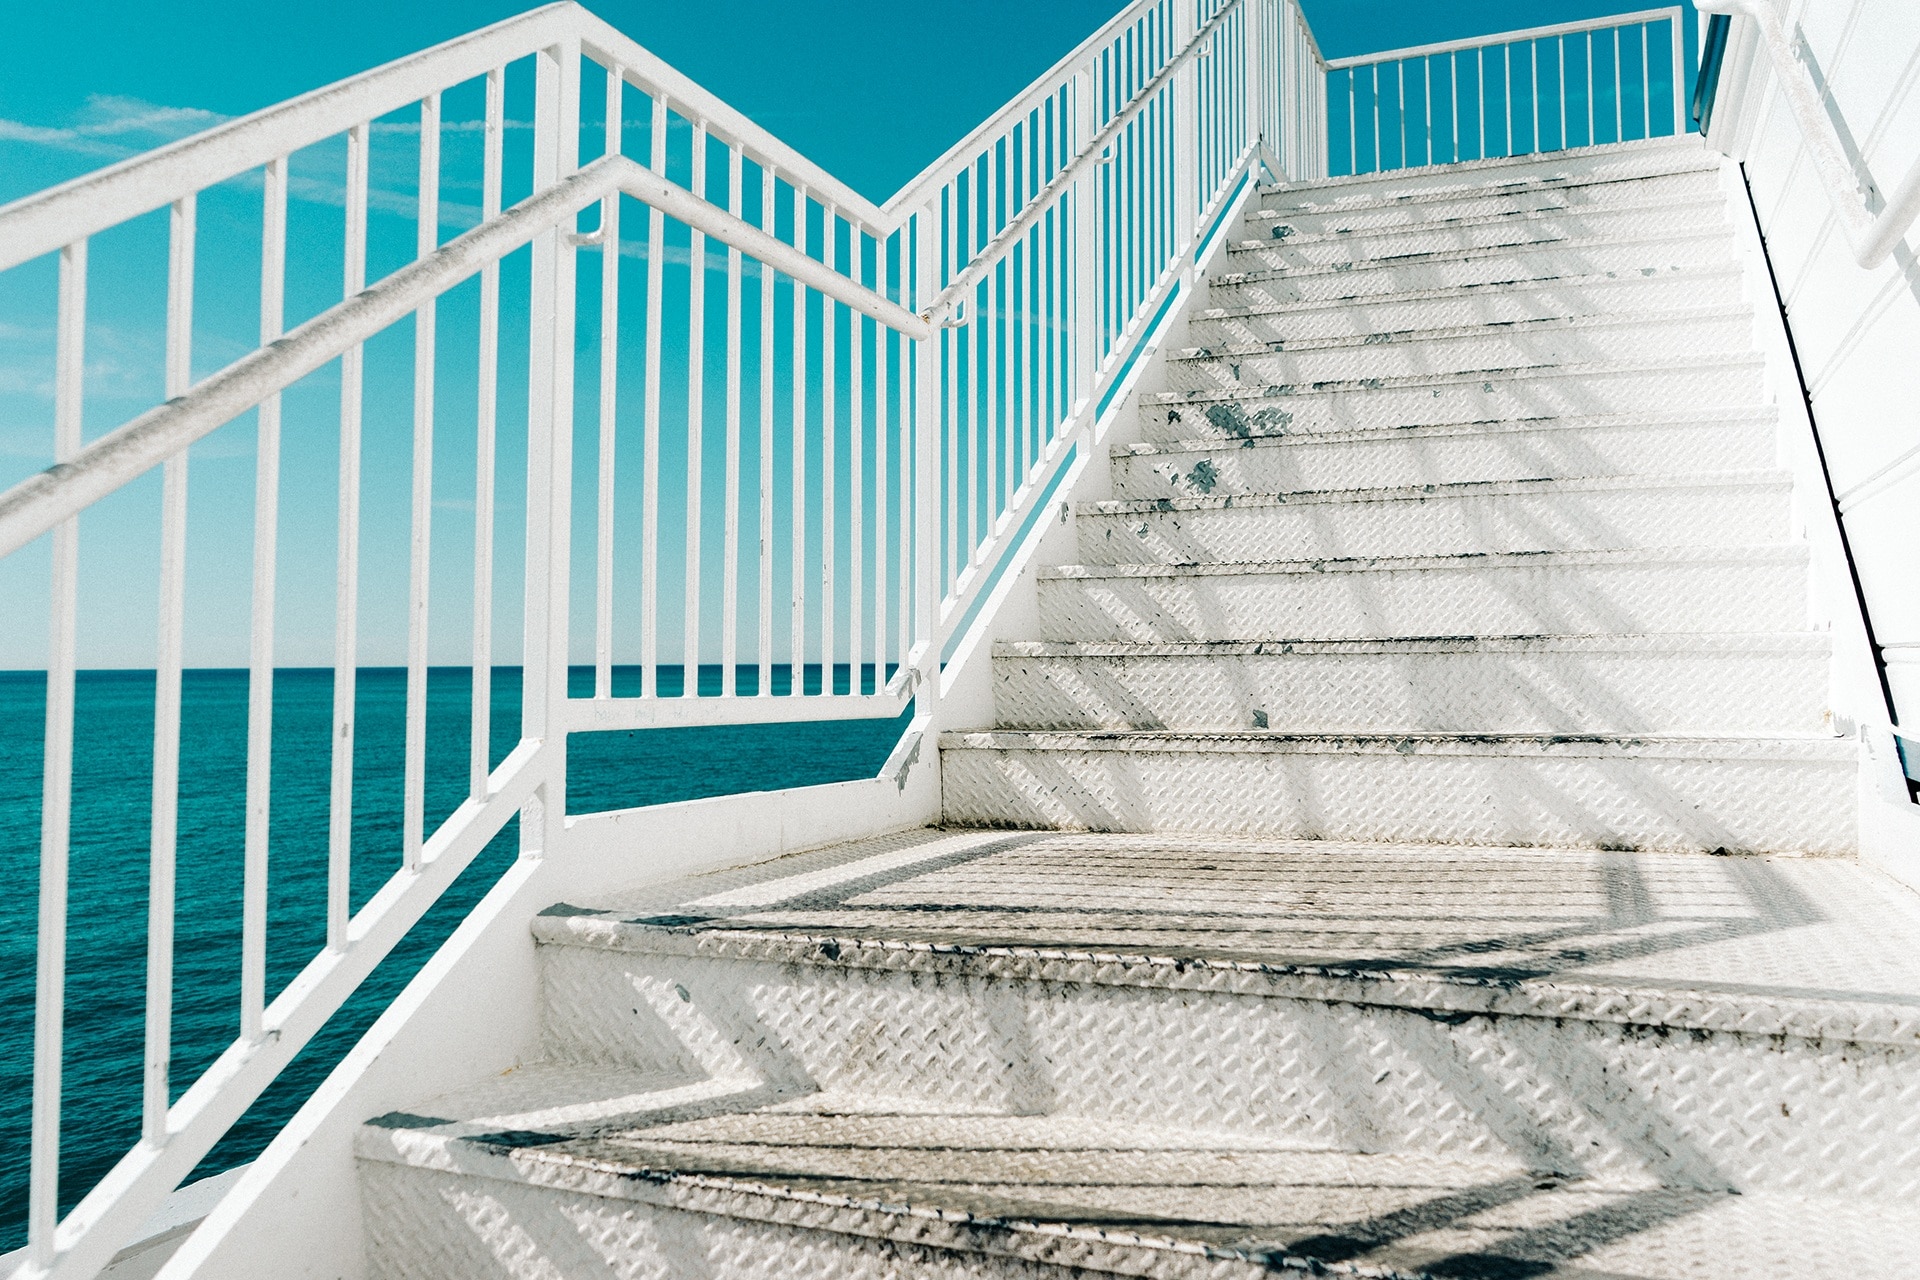 shallow focus photography of white steel staircase near blue ocean water during daytime